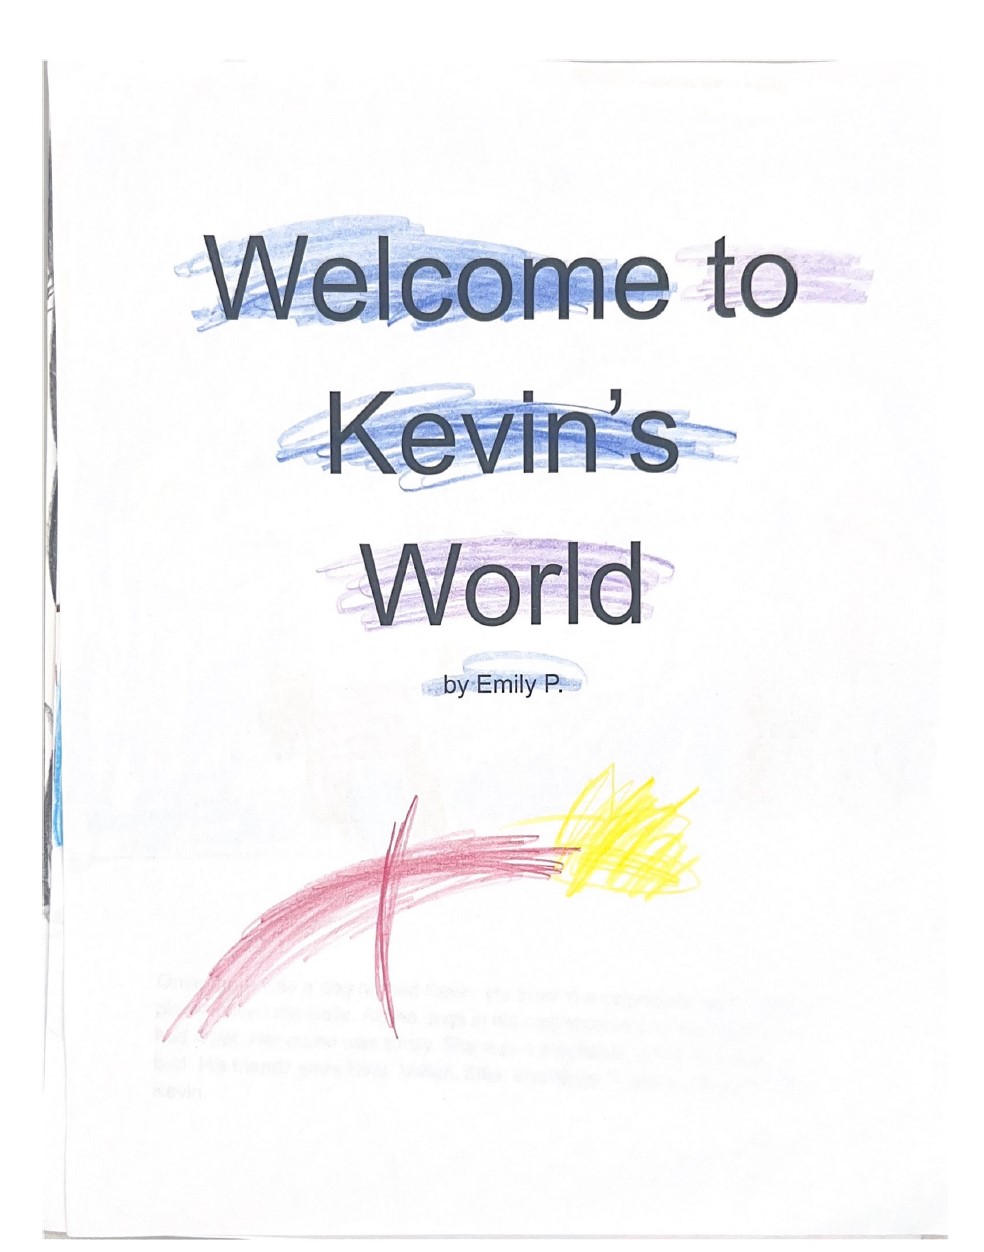 Welcome to Kevin’s World by Emily P.